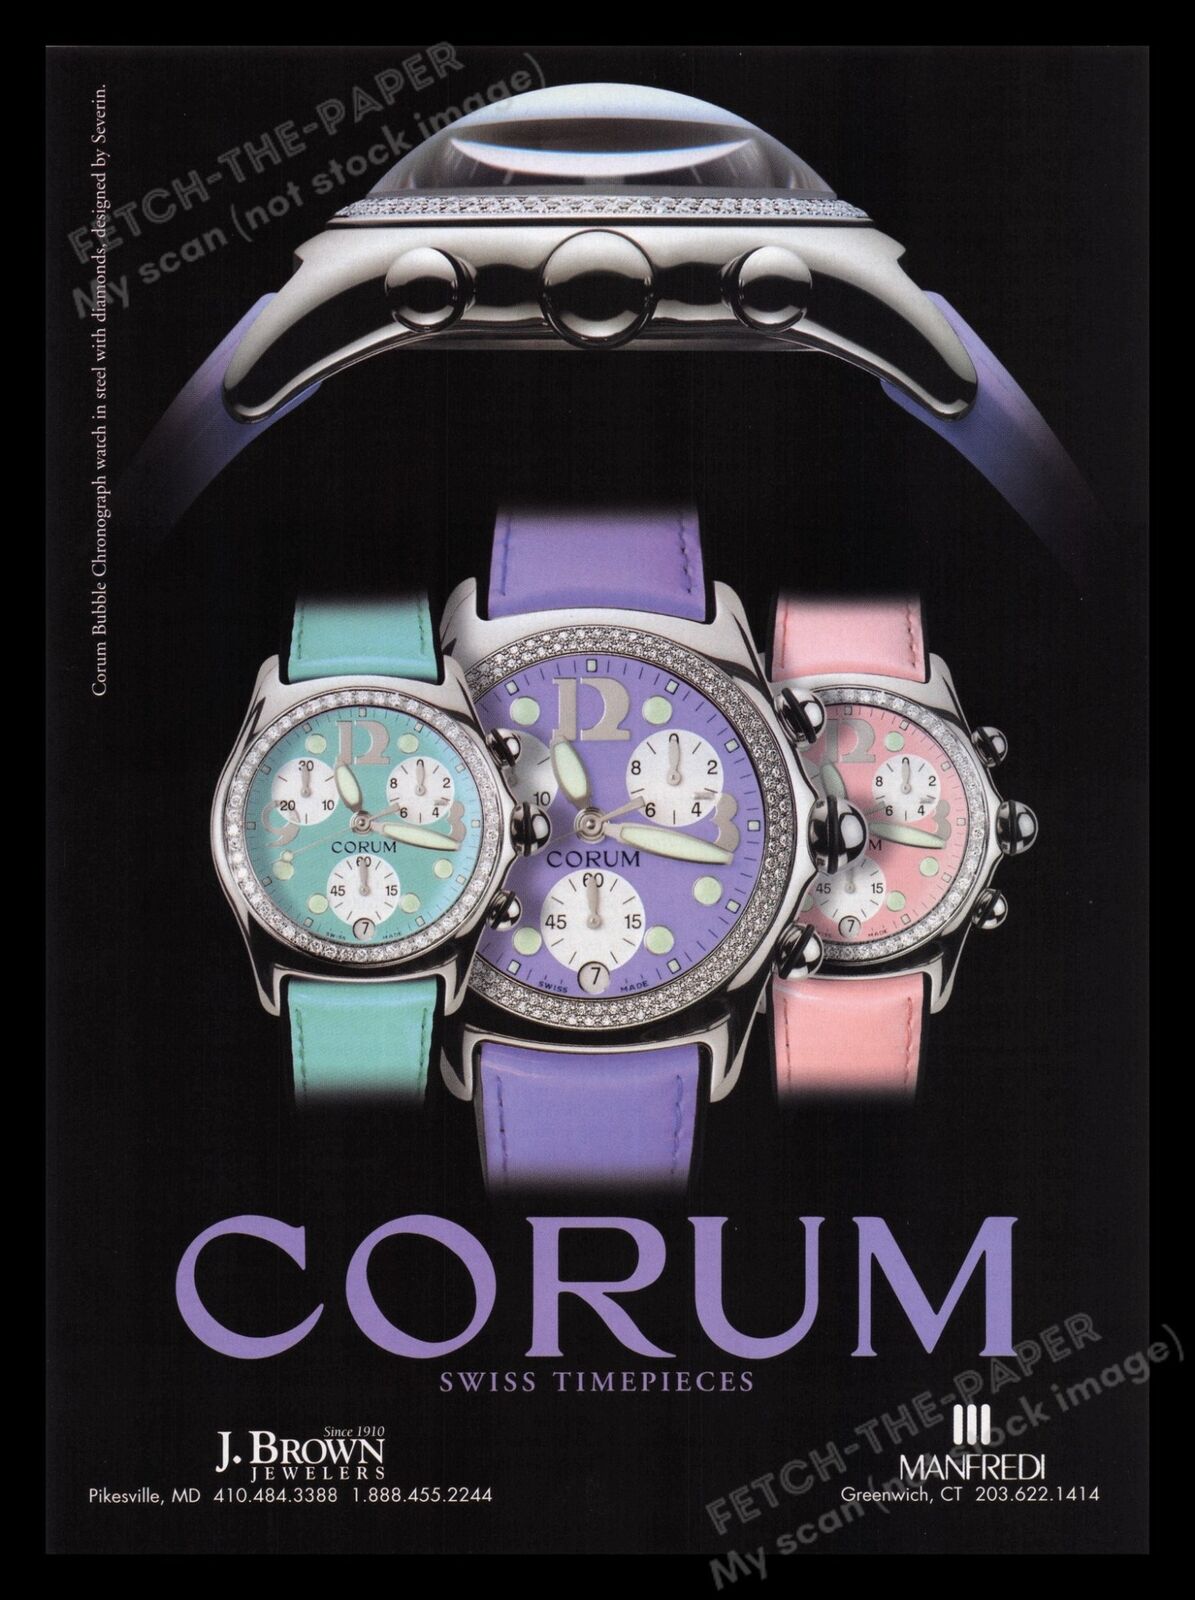 Corum Swiss Timepieces Watch 2000s Print Advertisement Ad 2001 Colorful Promo